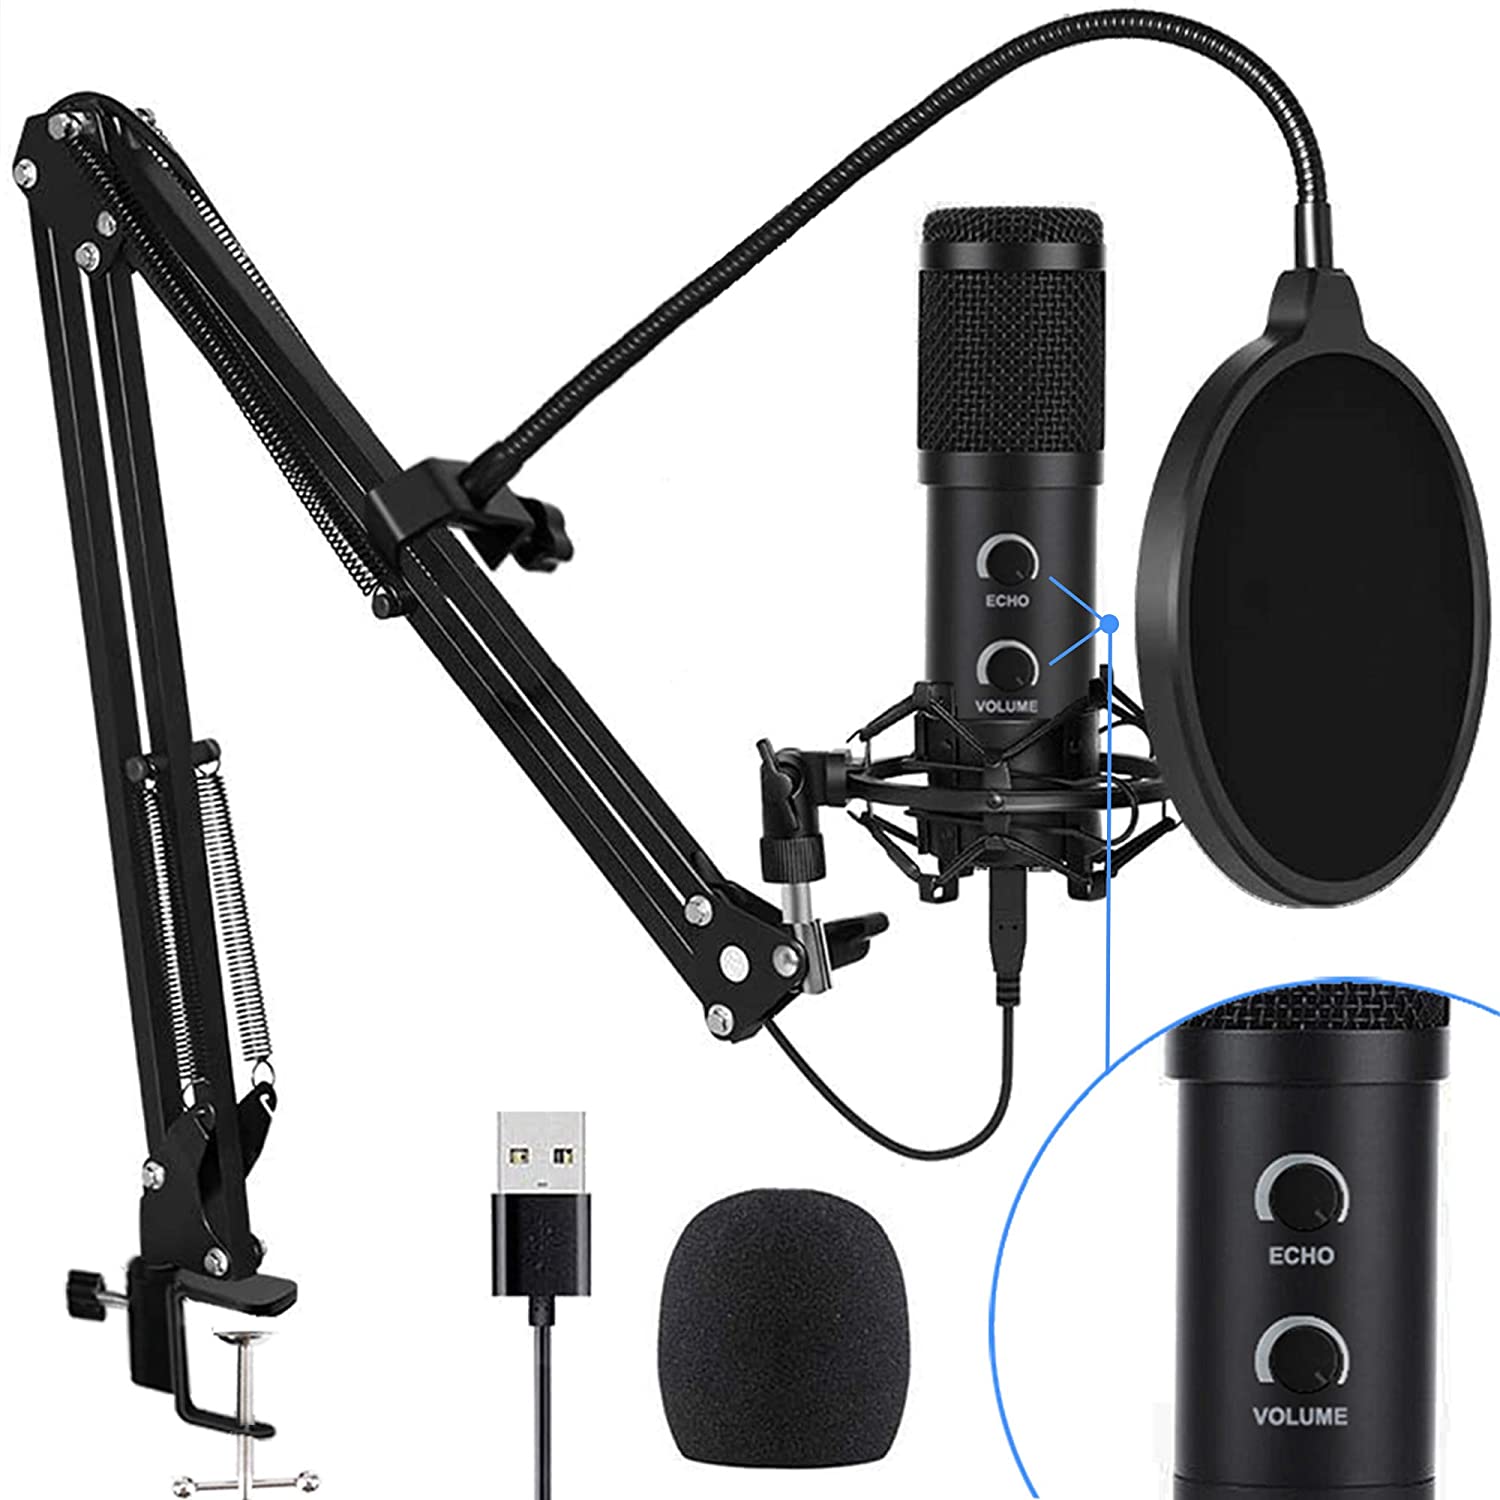 Fruity Orient Shredded USB Microphone Kit, Streaming Podcast PC Cardioid Condenser Computer Mic  for Gaming, YouTube Video, Recording Music, Voice Over, Studio Mic Bundle  with Adjustment Arm Stand(Q9) – Audio Engineering Associates